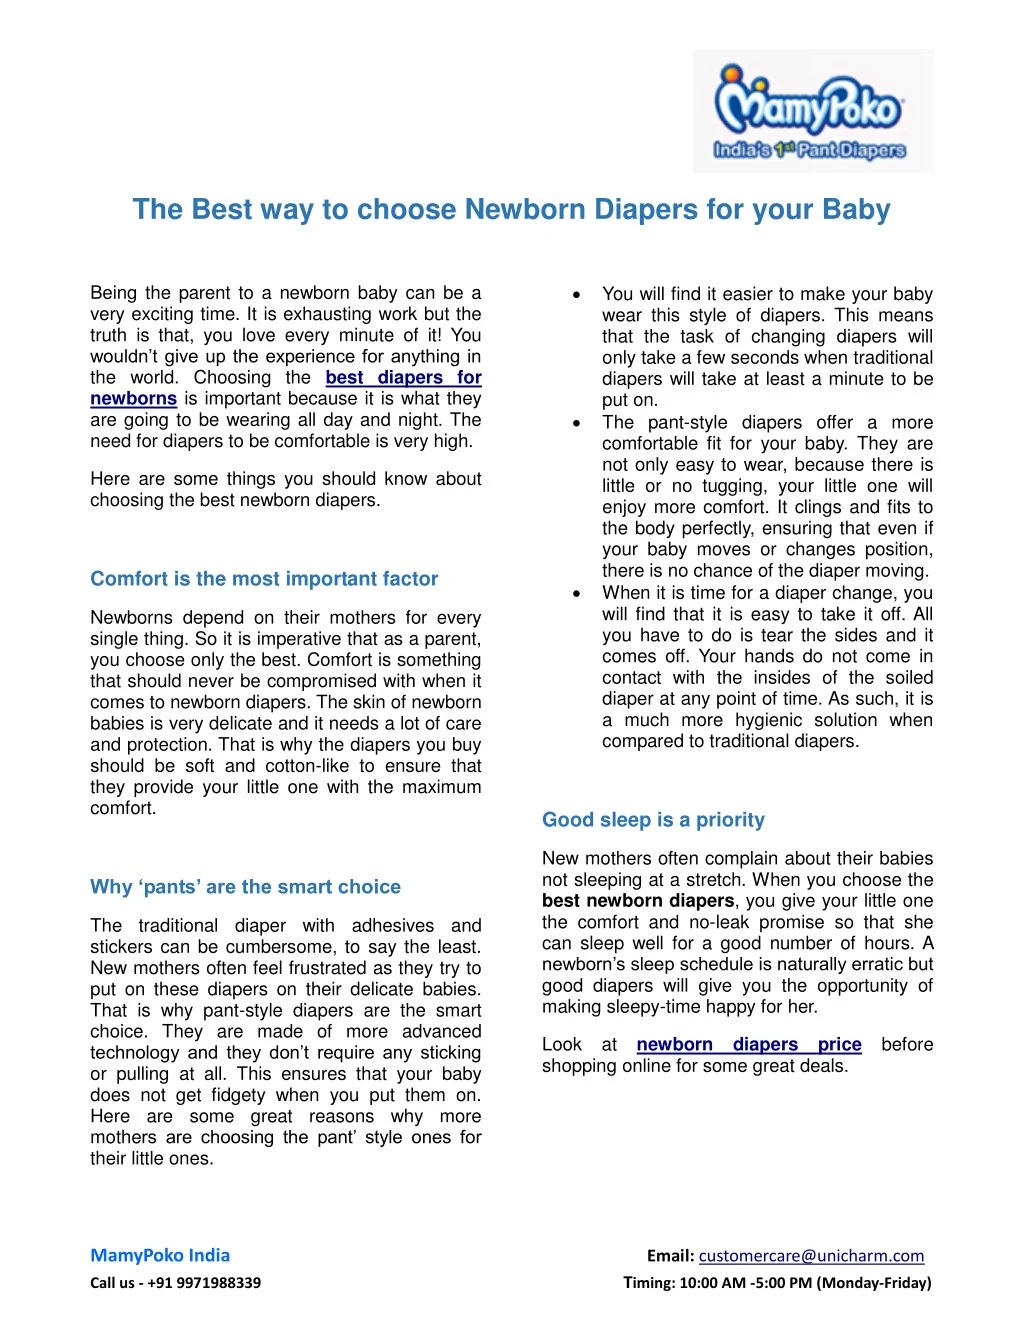 the best way to choose newborn diapers for your